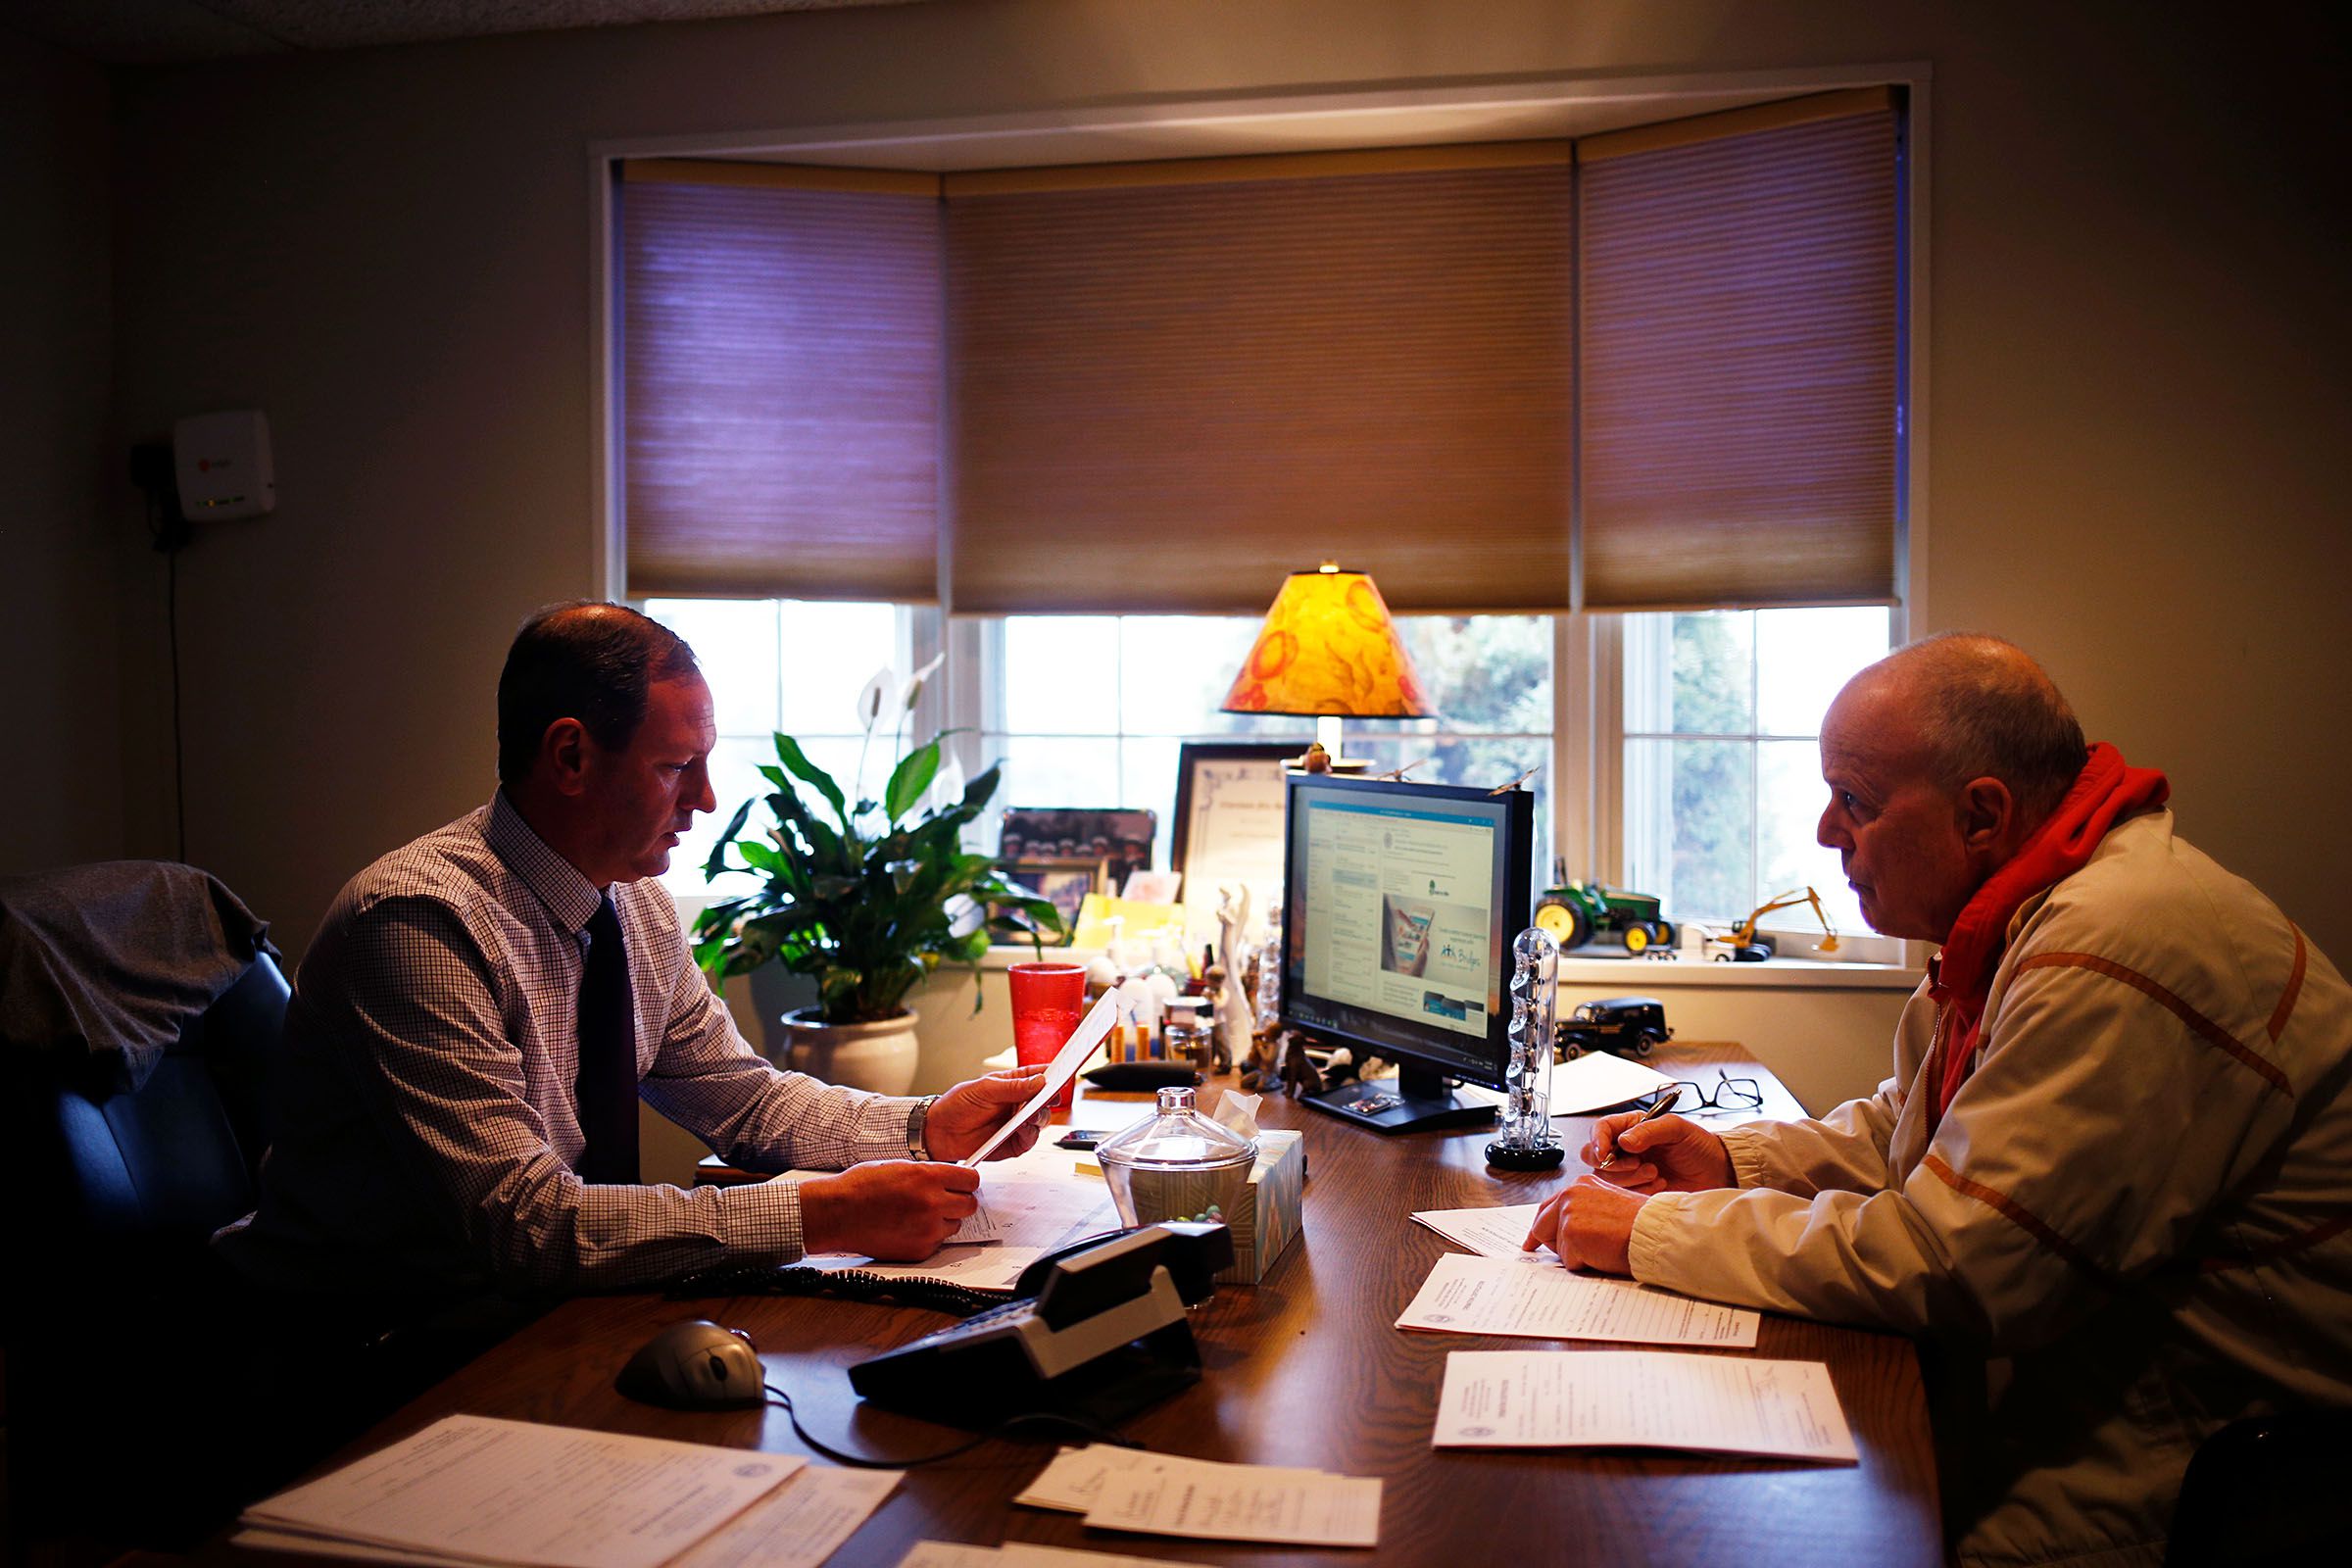 Owner Mike Stringer, left, meets with with New Hampshire Assistant Deputy Medical Examiner Mike Raymond to sign permissions for cremations at Stringer Funeral Home in Claremont, N.H., on Tuesday, April 9, 2019. Every cremation requires approval from a medical examiner. The funeral home now has a crematorium on site to make the process much easier. (Valley News - Joseph Ressler) Copyright Valley News. May not be reprinted or used online without permission. Send requests to permission@vnews.com.